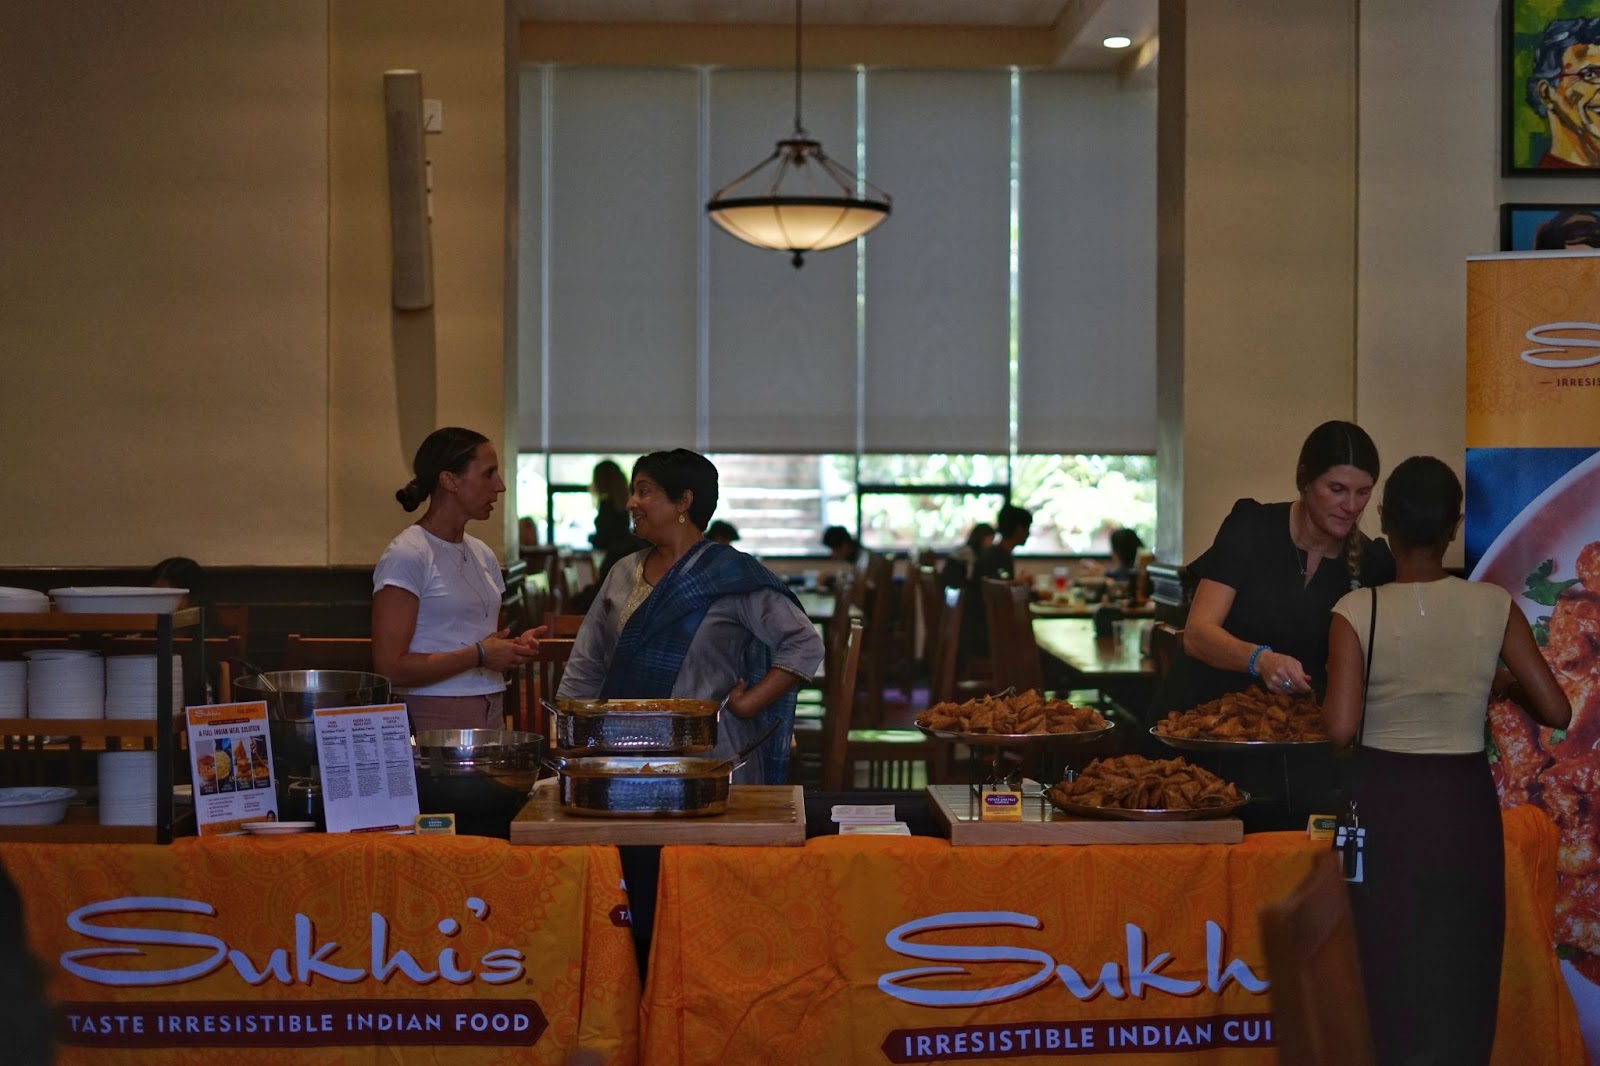 A pair of tables is set up in the dining hall, on which the cloth on the table, reads ‘Sukhi’s, Taste Irresistible Indian Food. Placards showcasing the list of products offered by Sukhi’s rests on the table. Sanjog, the owner stands animated speaking to her associate. There is another associate in white on the right, serving a sample of the samosa and chutney to a resident